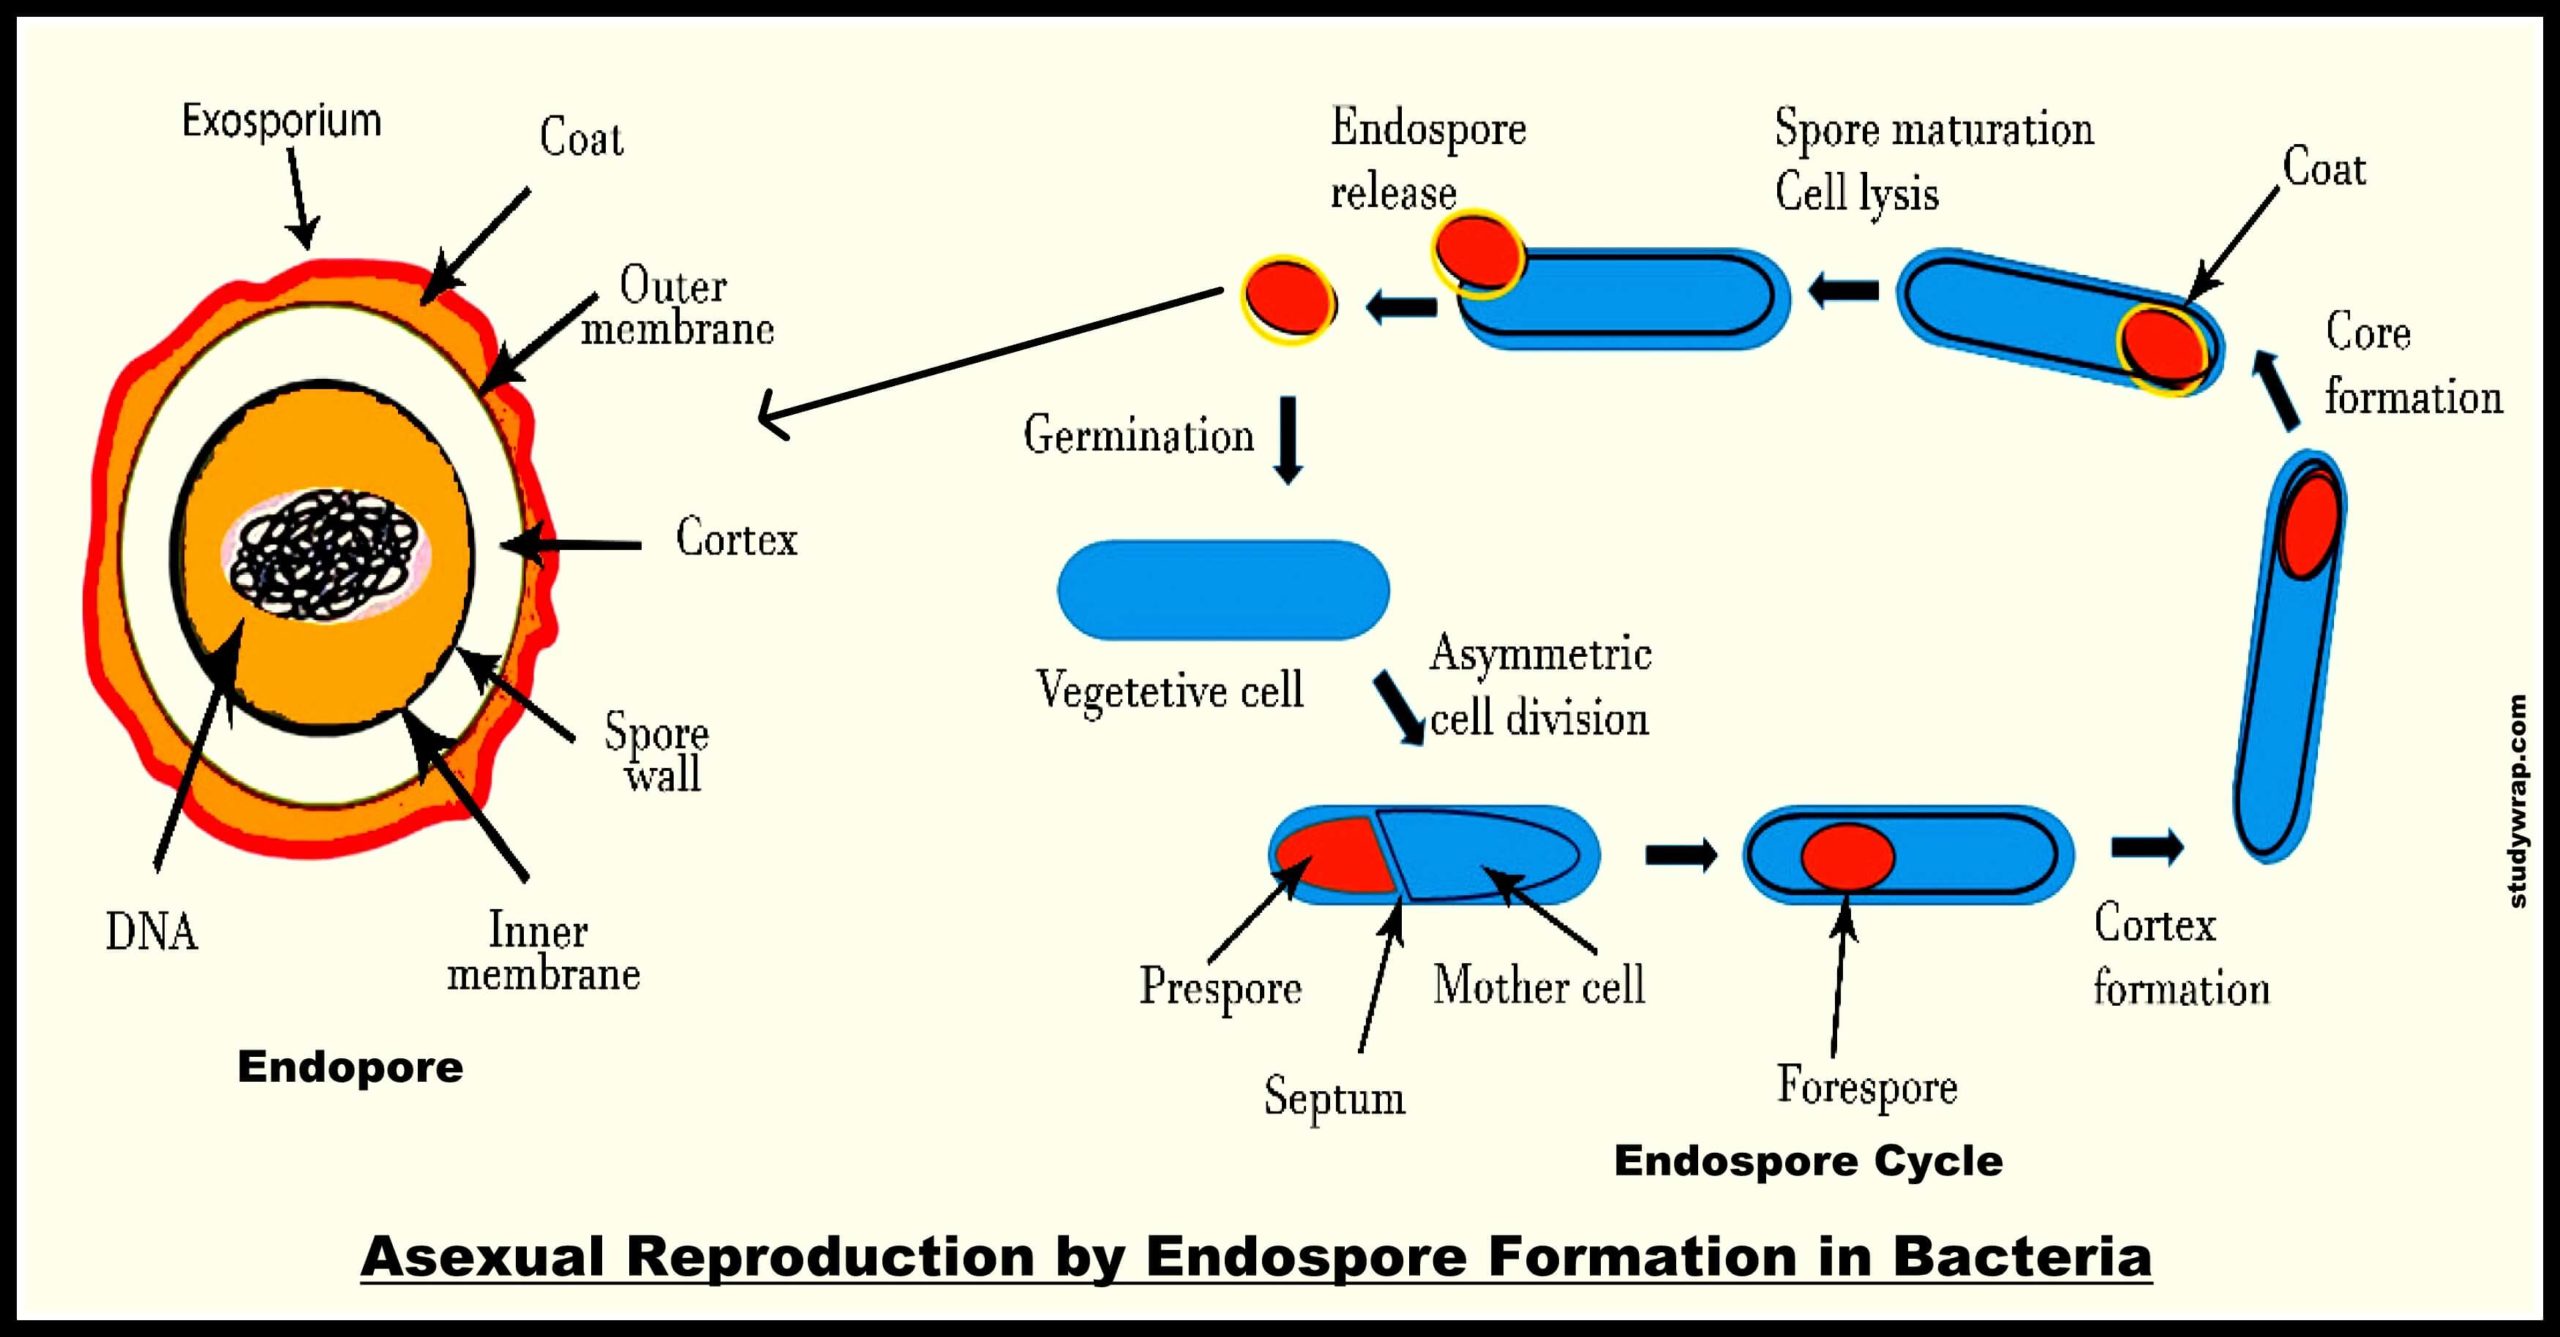 Mode of Reproduction in Bacteria, Vegetative Reproduction, Asexual and Sexual Reproduction, budding, Endospore formation, Transformation etc. biology notes by Studywrap.com